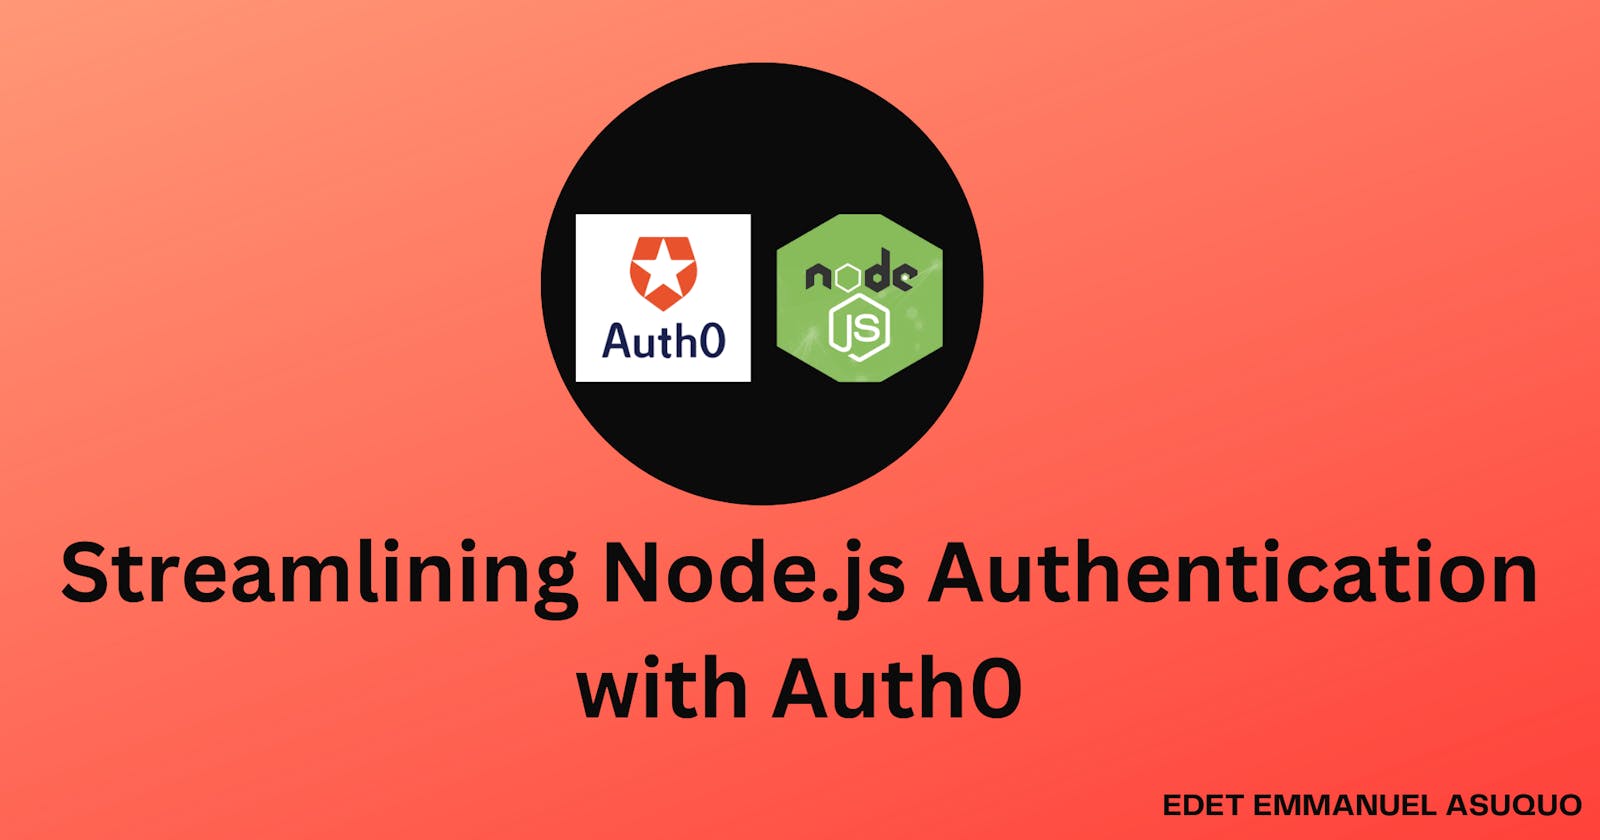 Streamlining Node.js Authentication with Auth0